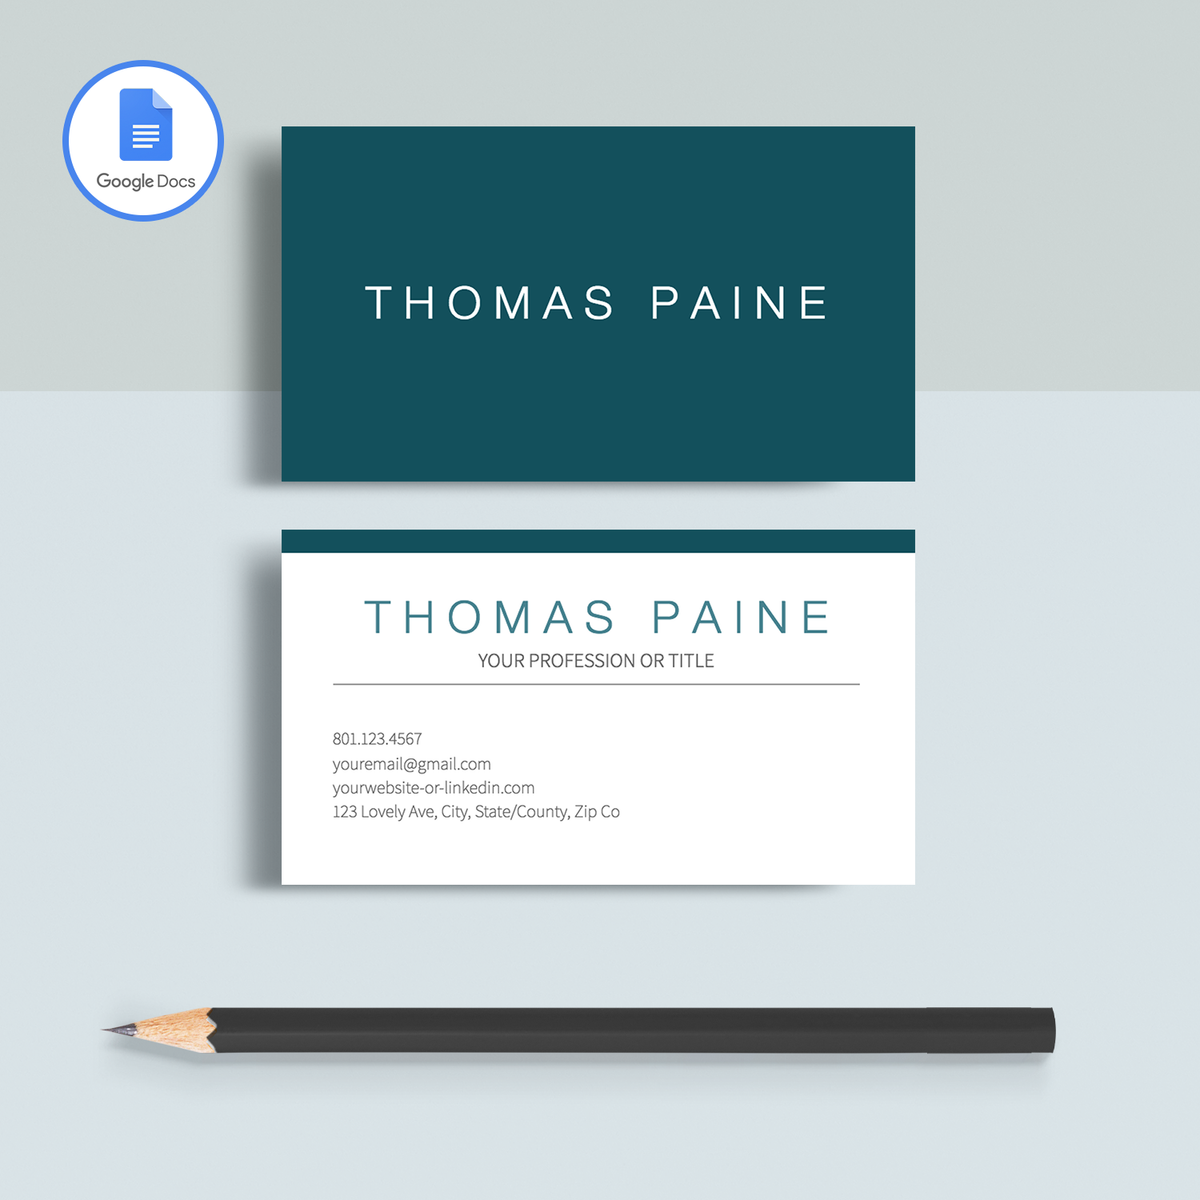 Professional Business Cards Template for Google Docs Thomas Paine